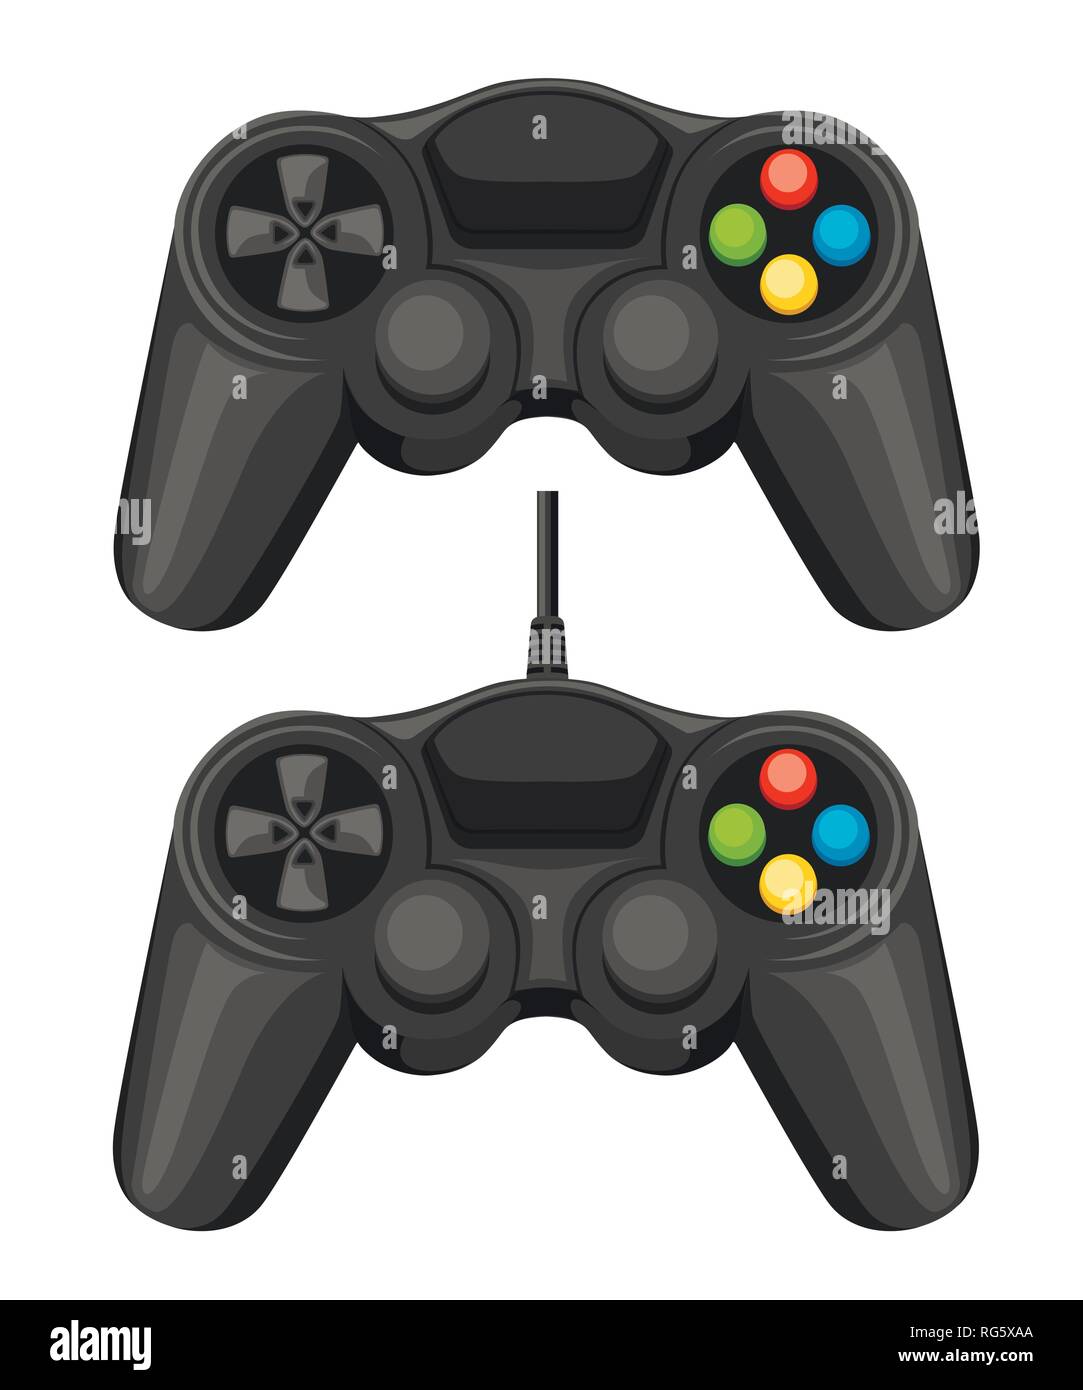 Wired and wireless game pad. Black video game controller. Gamepad for PC or Console gaming. Flat vector illustration isolated on white background. Stock Vector